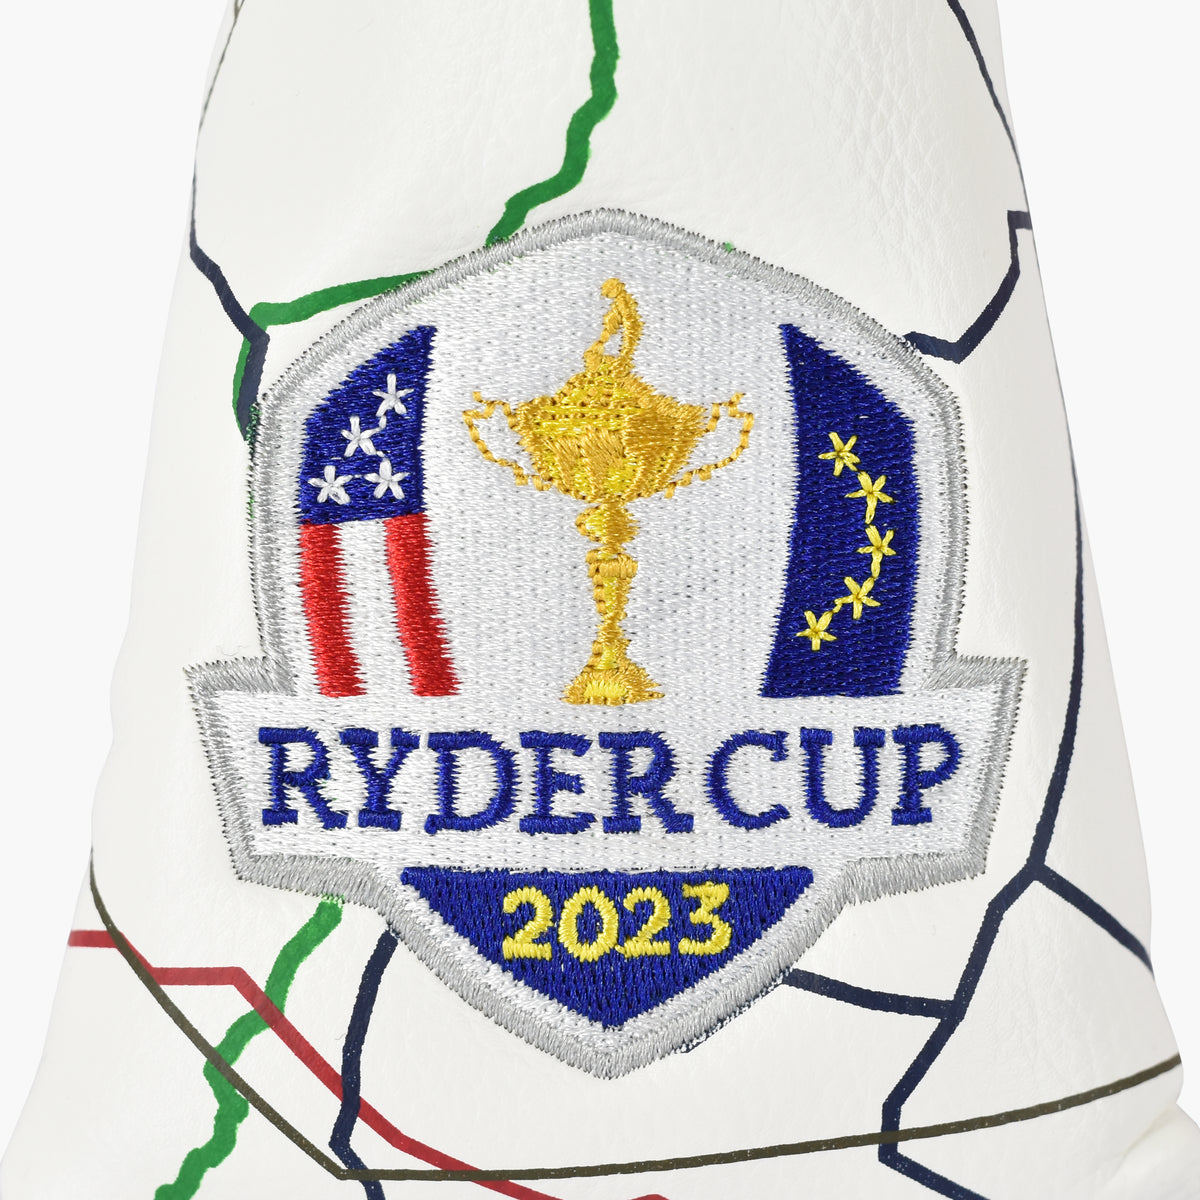 2023 Ryder Cup PRG All Roads Lead To Rome Blade Cover